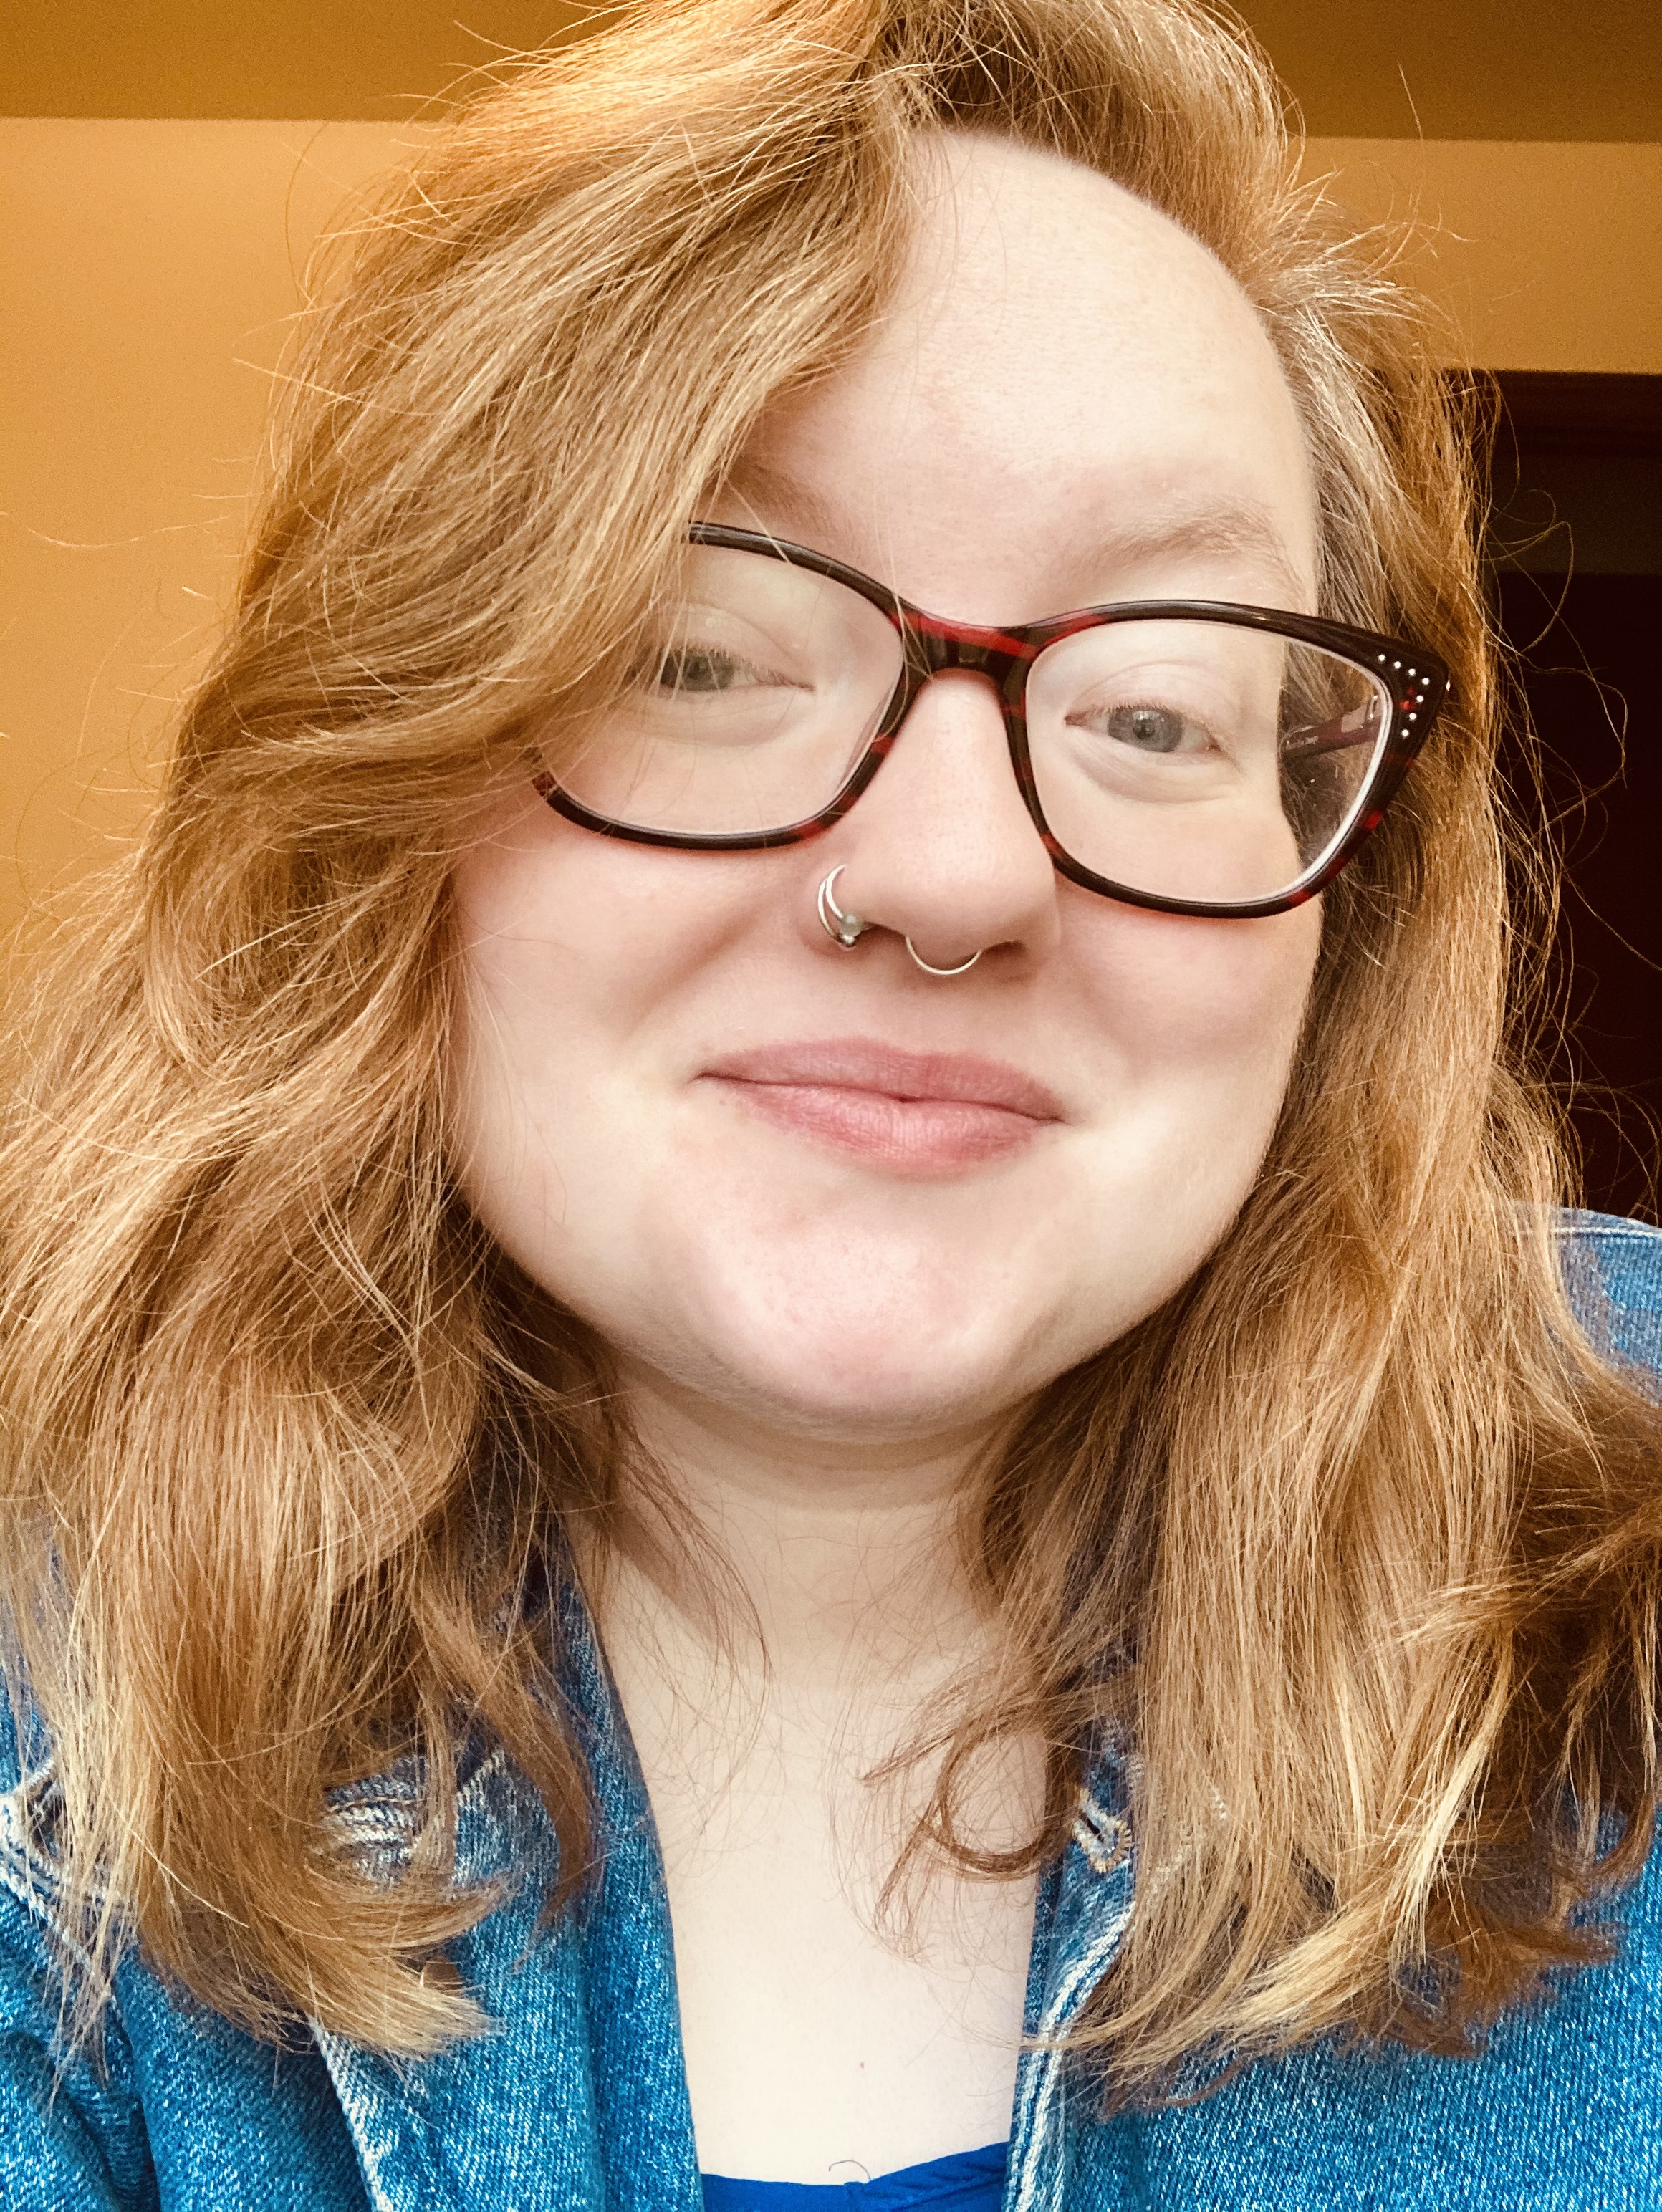 [Image Description: Renn, Director of Operations, a White non-binary person person, smiling at the camera. They have blonde hair, a blue shirt, glasses, and nose piercings.